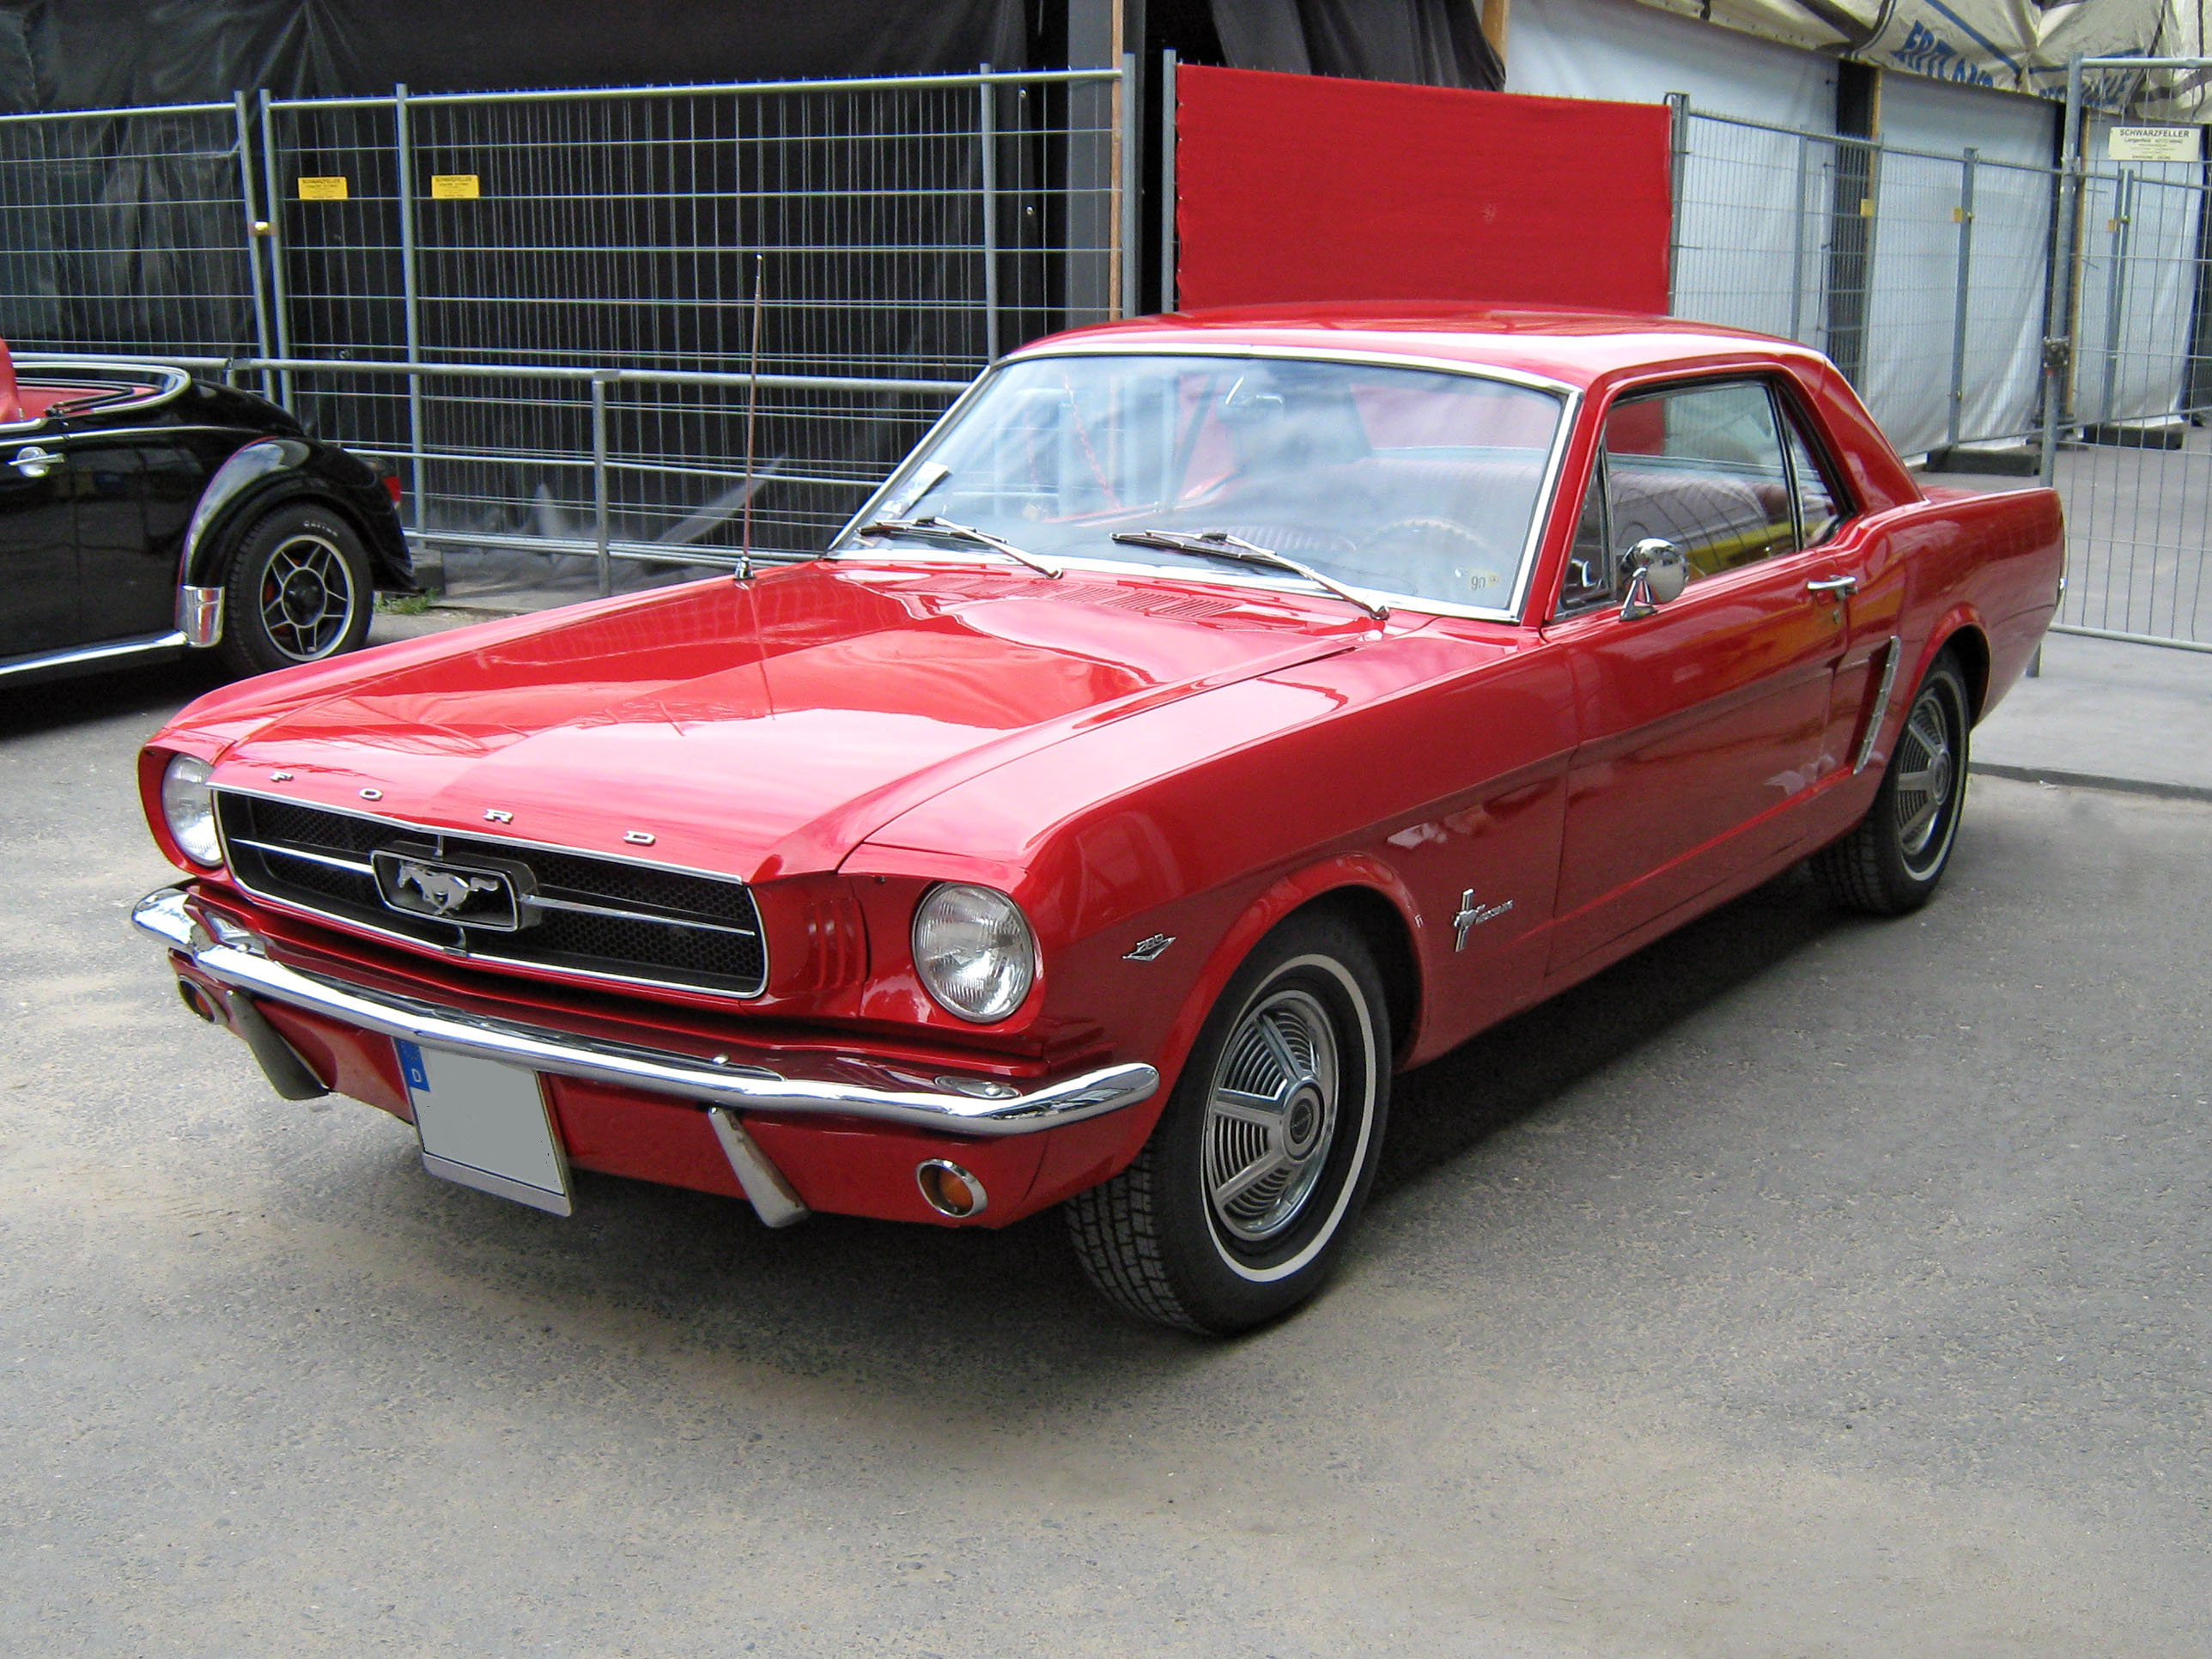 http://upload.wikimedia.org/wikipedia/commons/7/7f/1965_Ford_Mustang_2D_Hardtop_Front.jpg